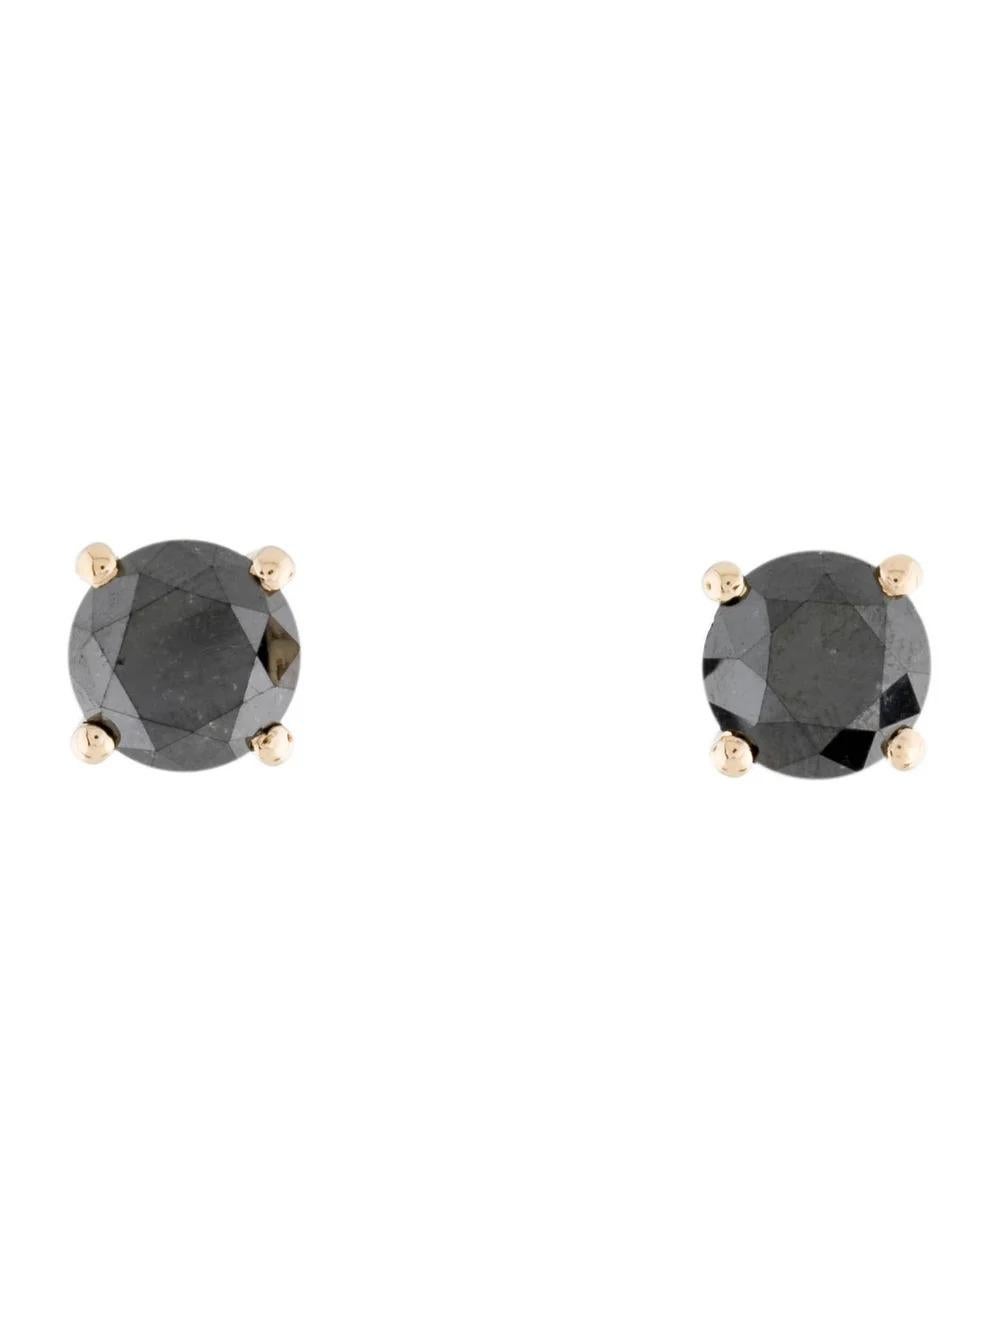 Discover elegance and sophistication with these stunning 14K Yellow Gold Diamond Stud Earrings. Crafted to perfection, these earrings are a testament to timeless beauty and exquisite craftsmanship. Adorned with earth-mined diamonds, each earring